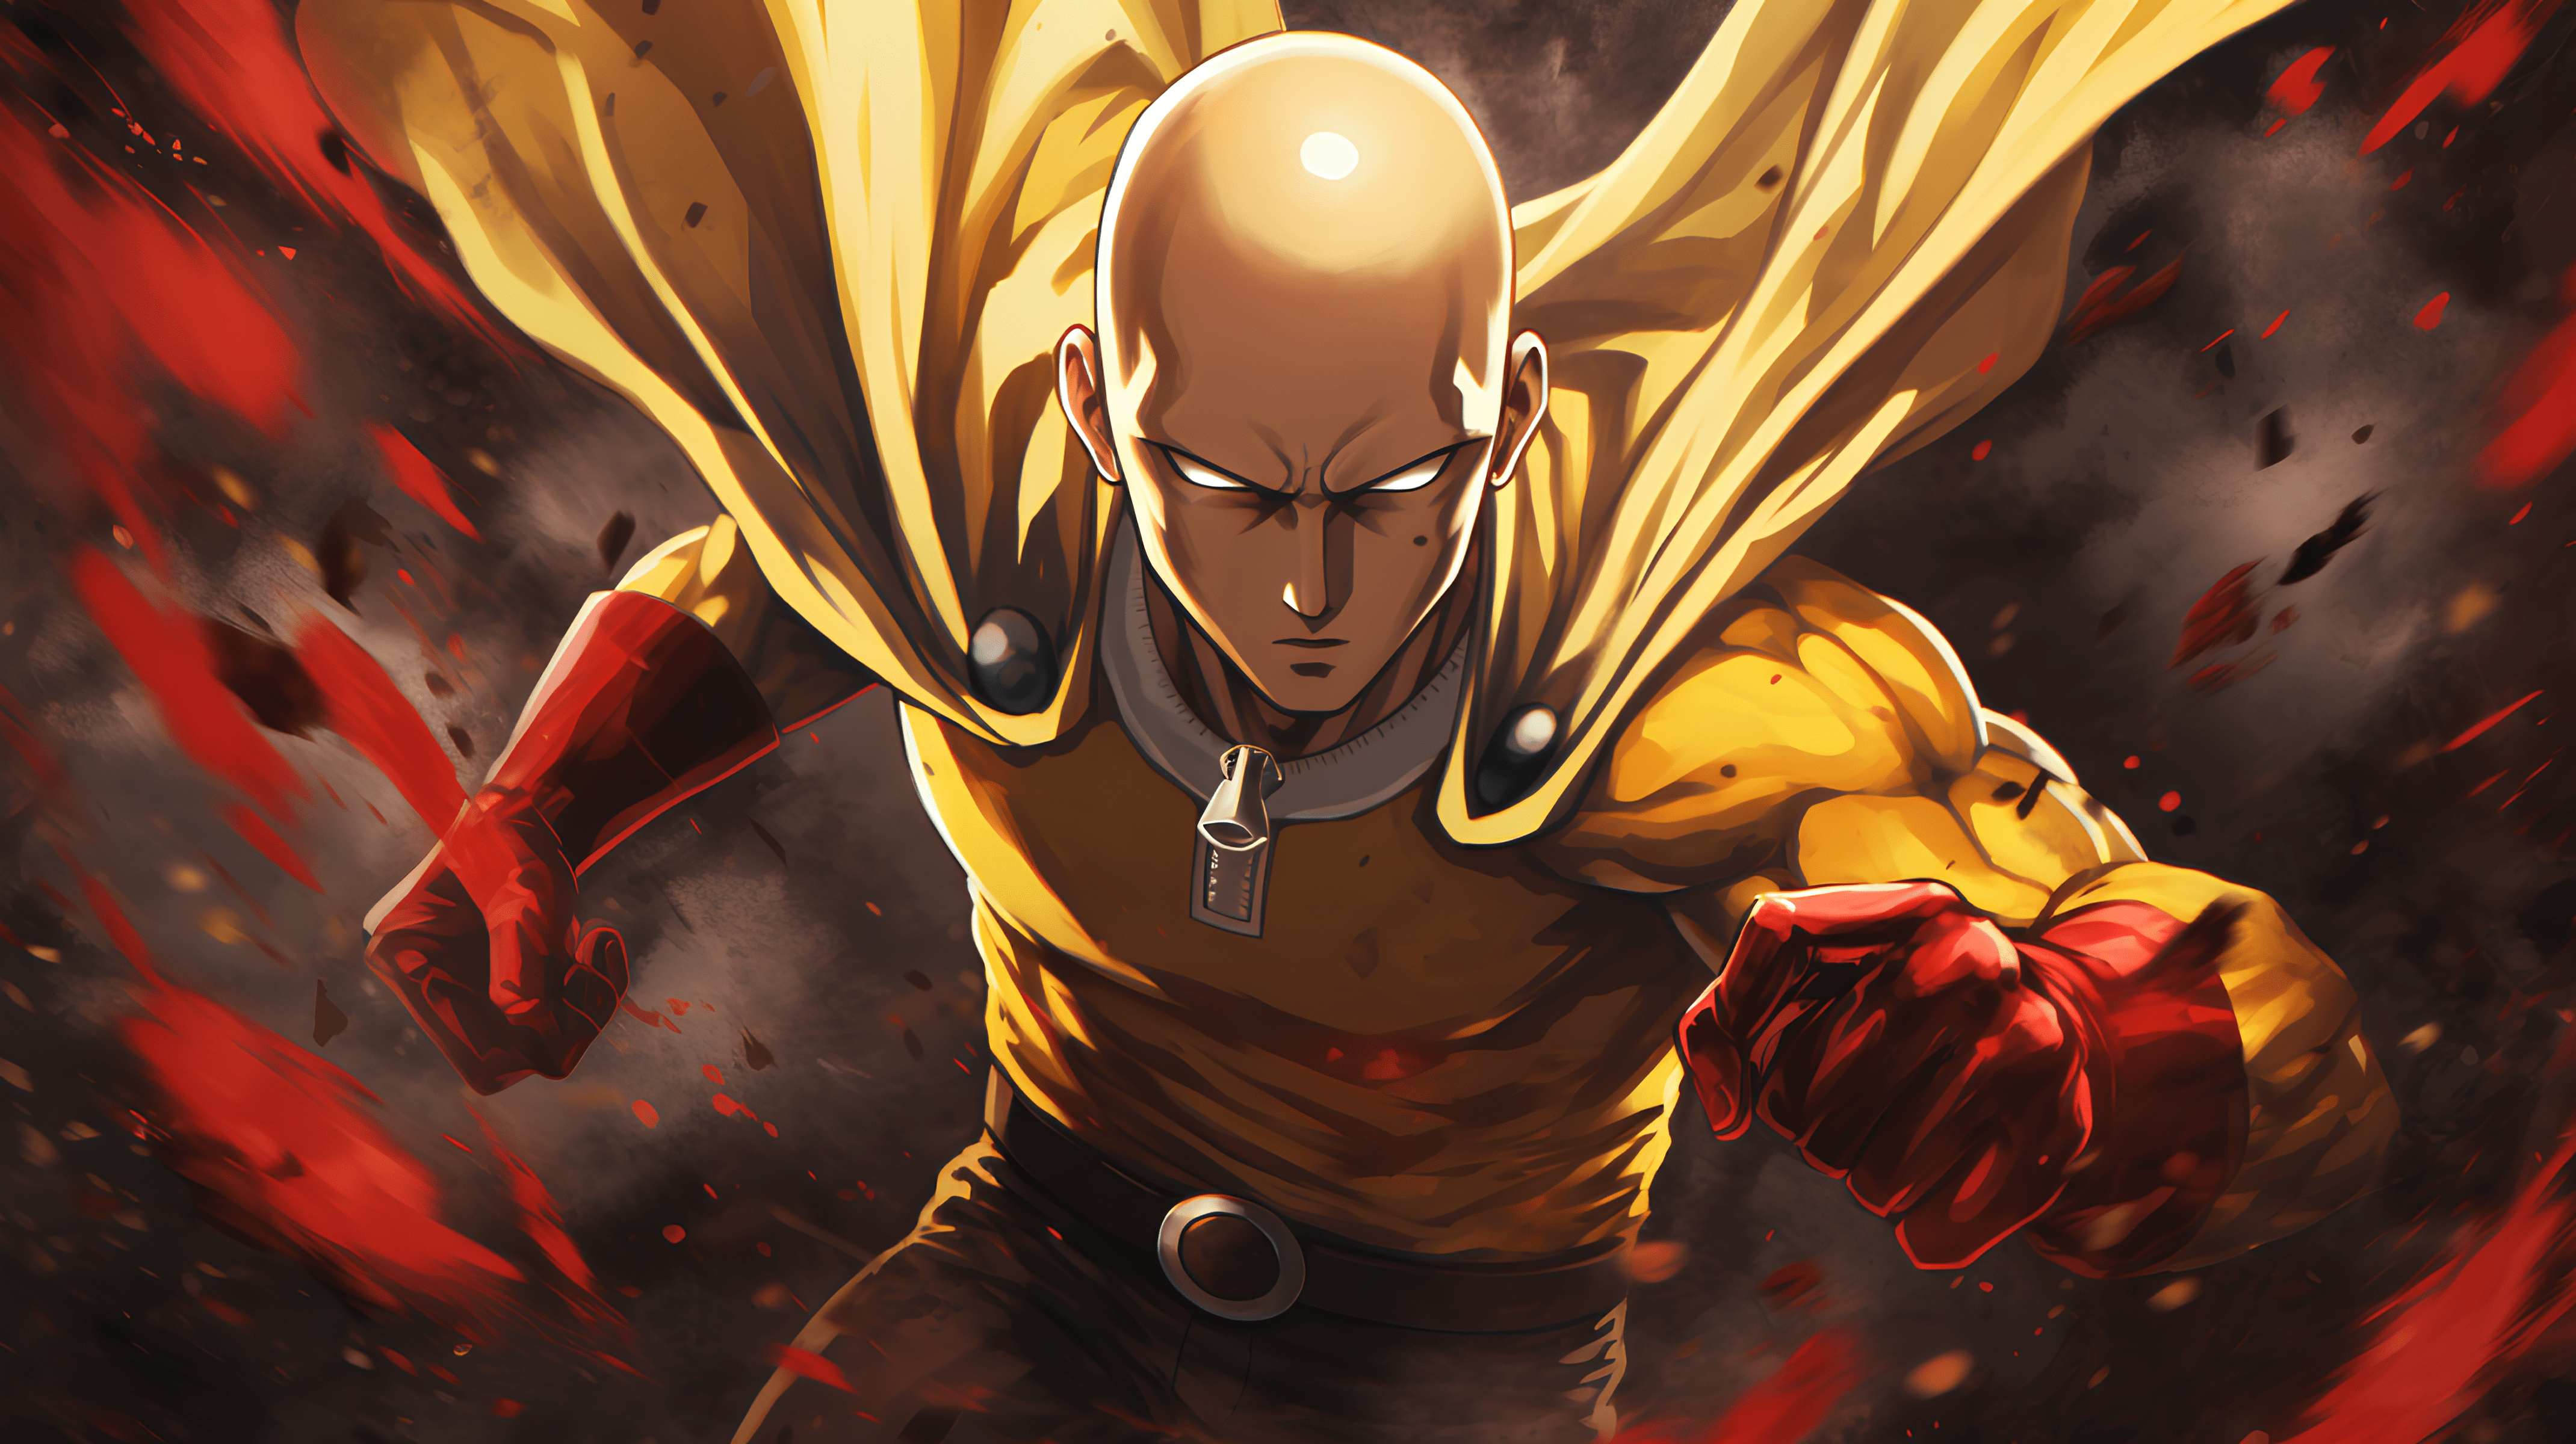 10 of the Most Popular One-Punch Man Fanfiction Stories to Read in 2023